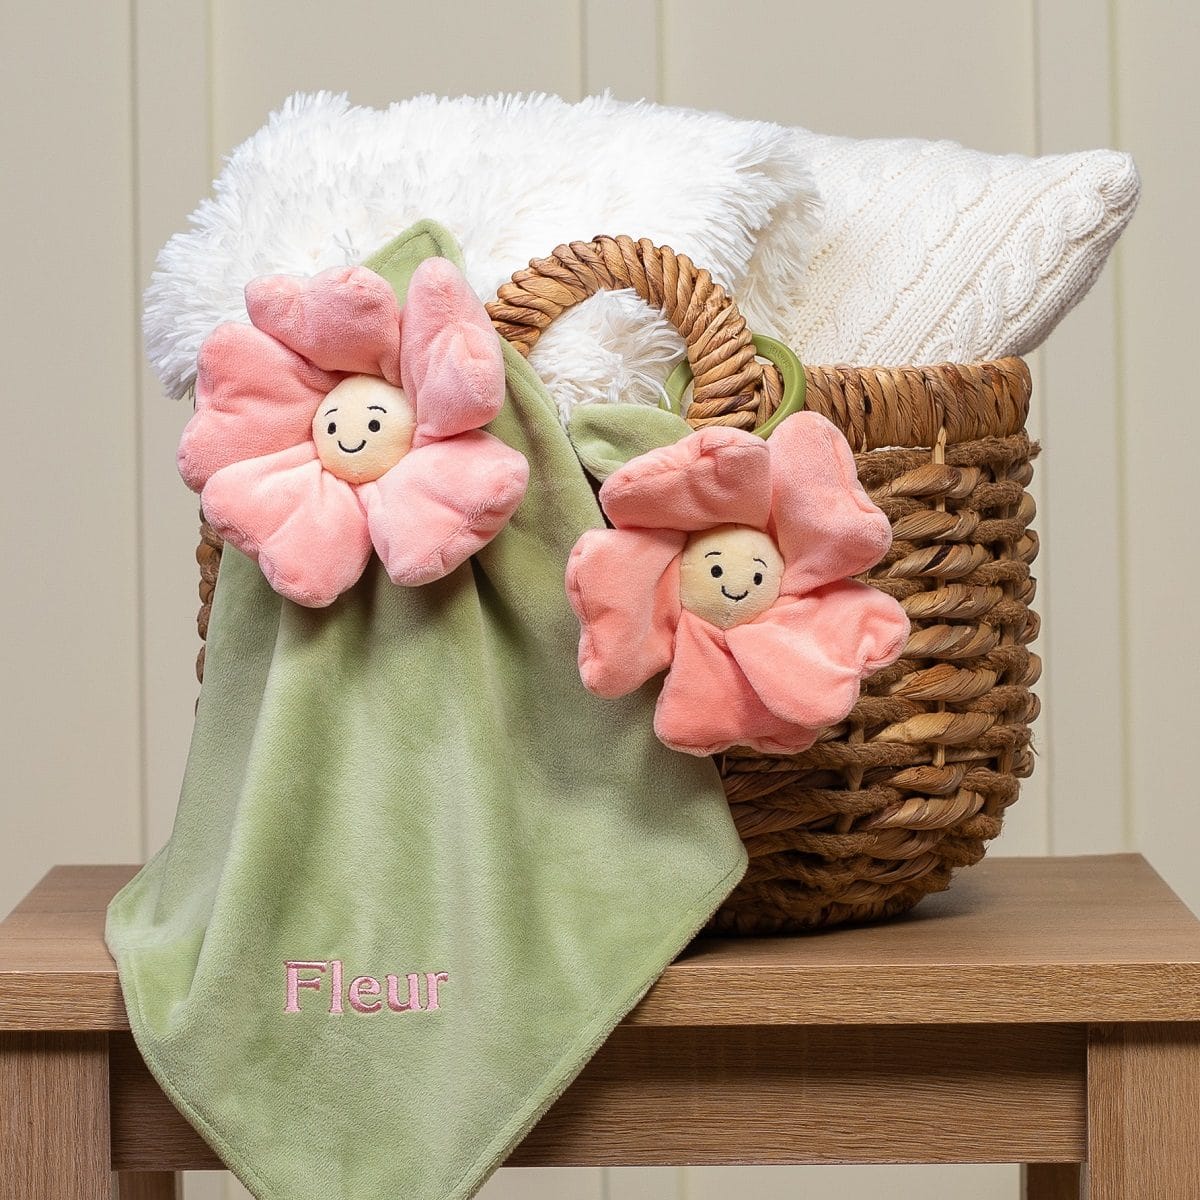 Personalised Jellycat Fleury Petunia Soother and jitter gift set